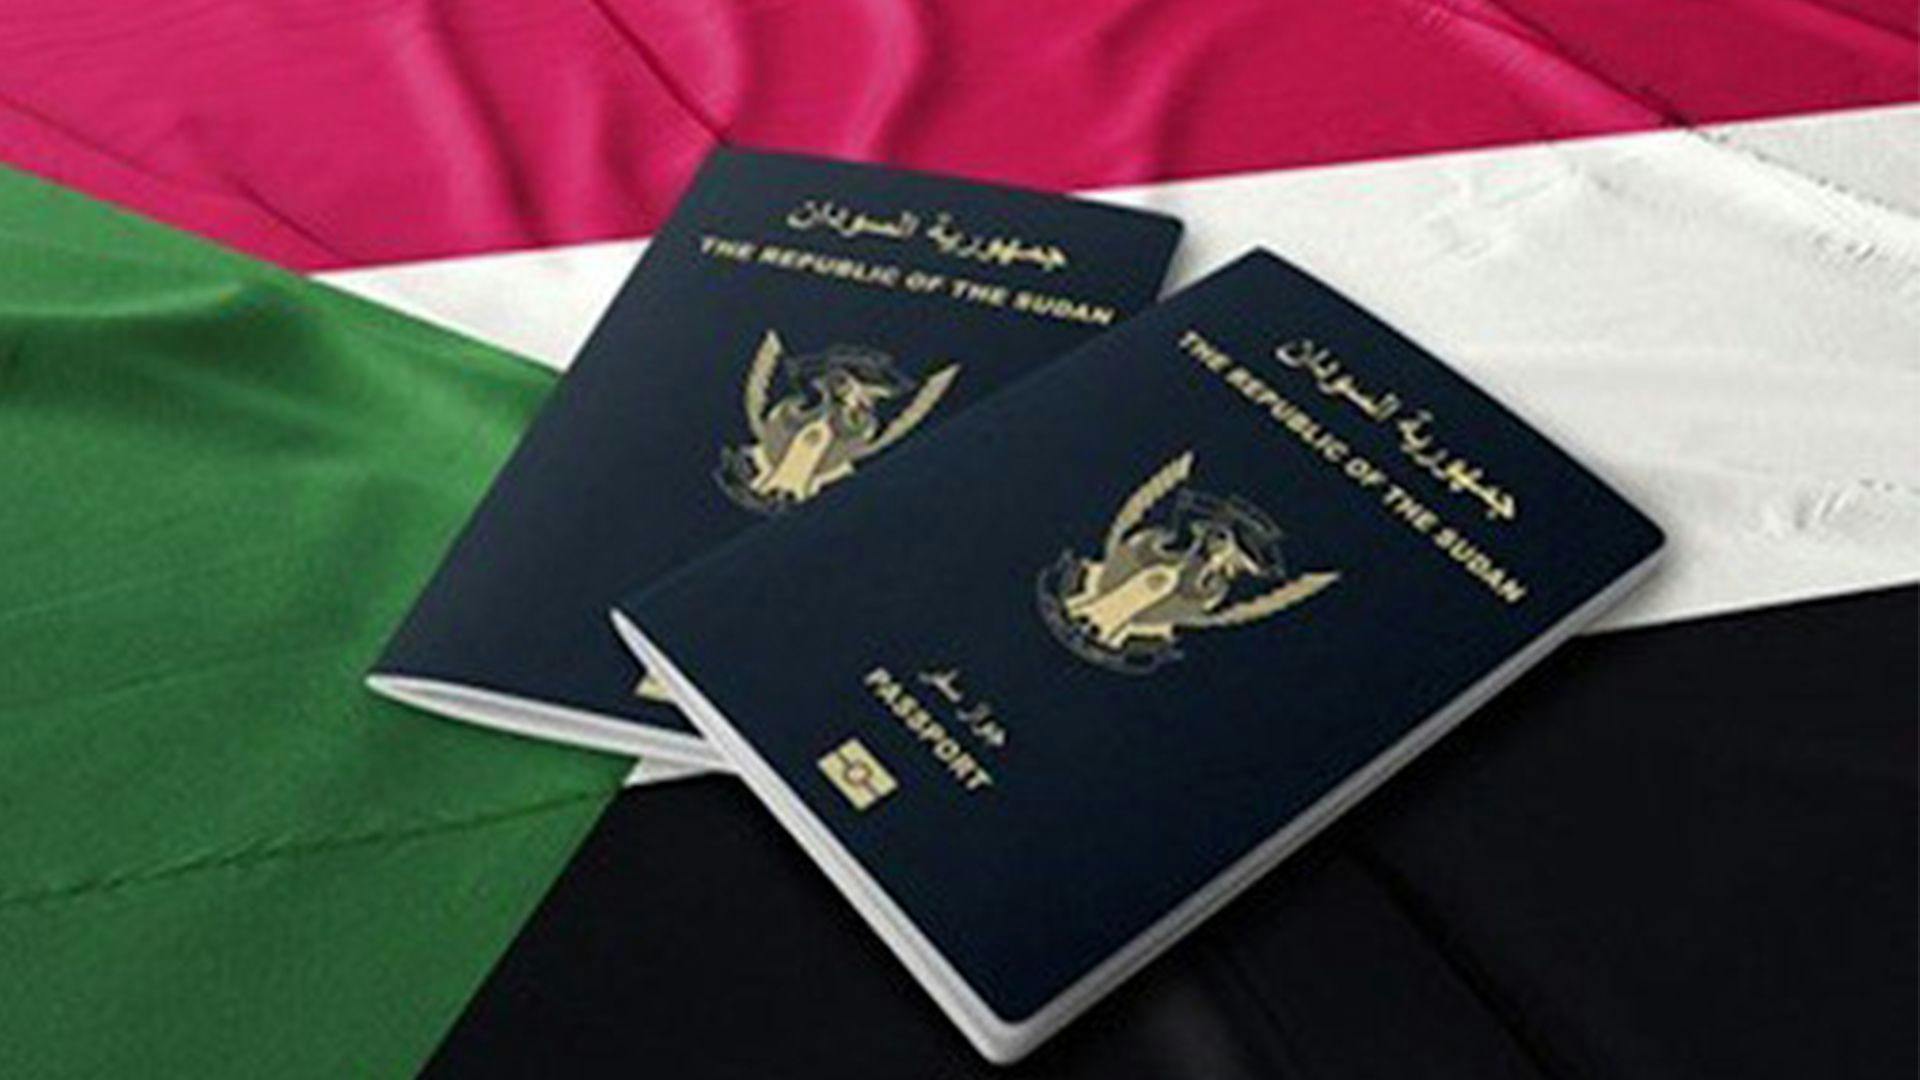 Ethiopians are being harassed for not having a residence permit in Sudan